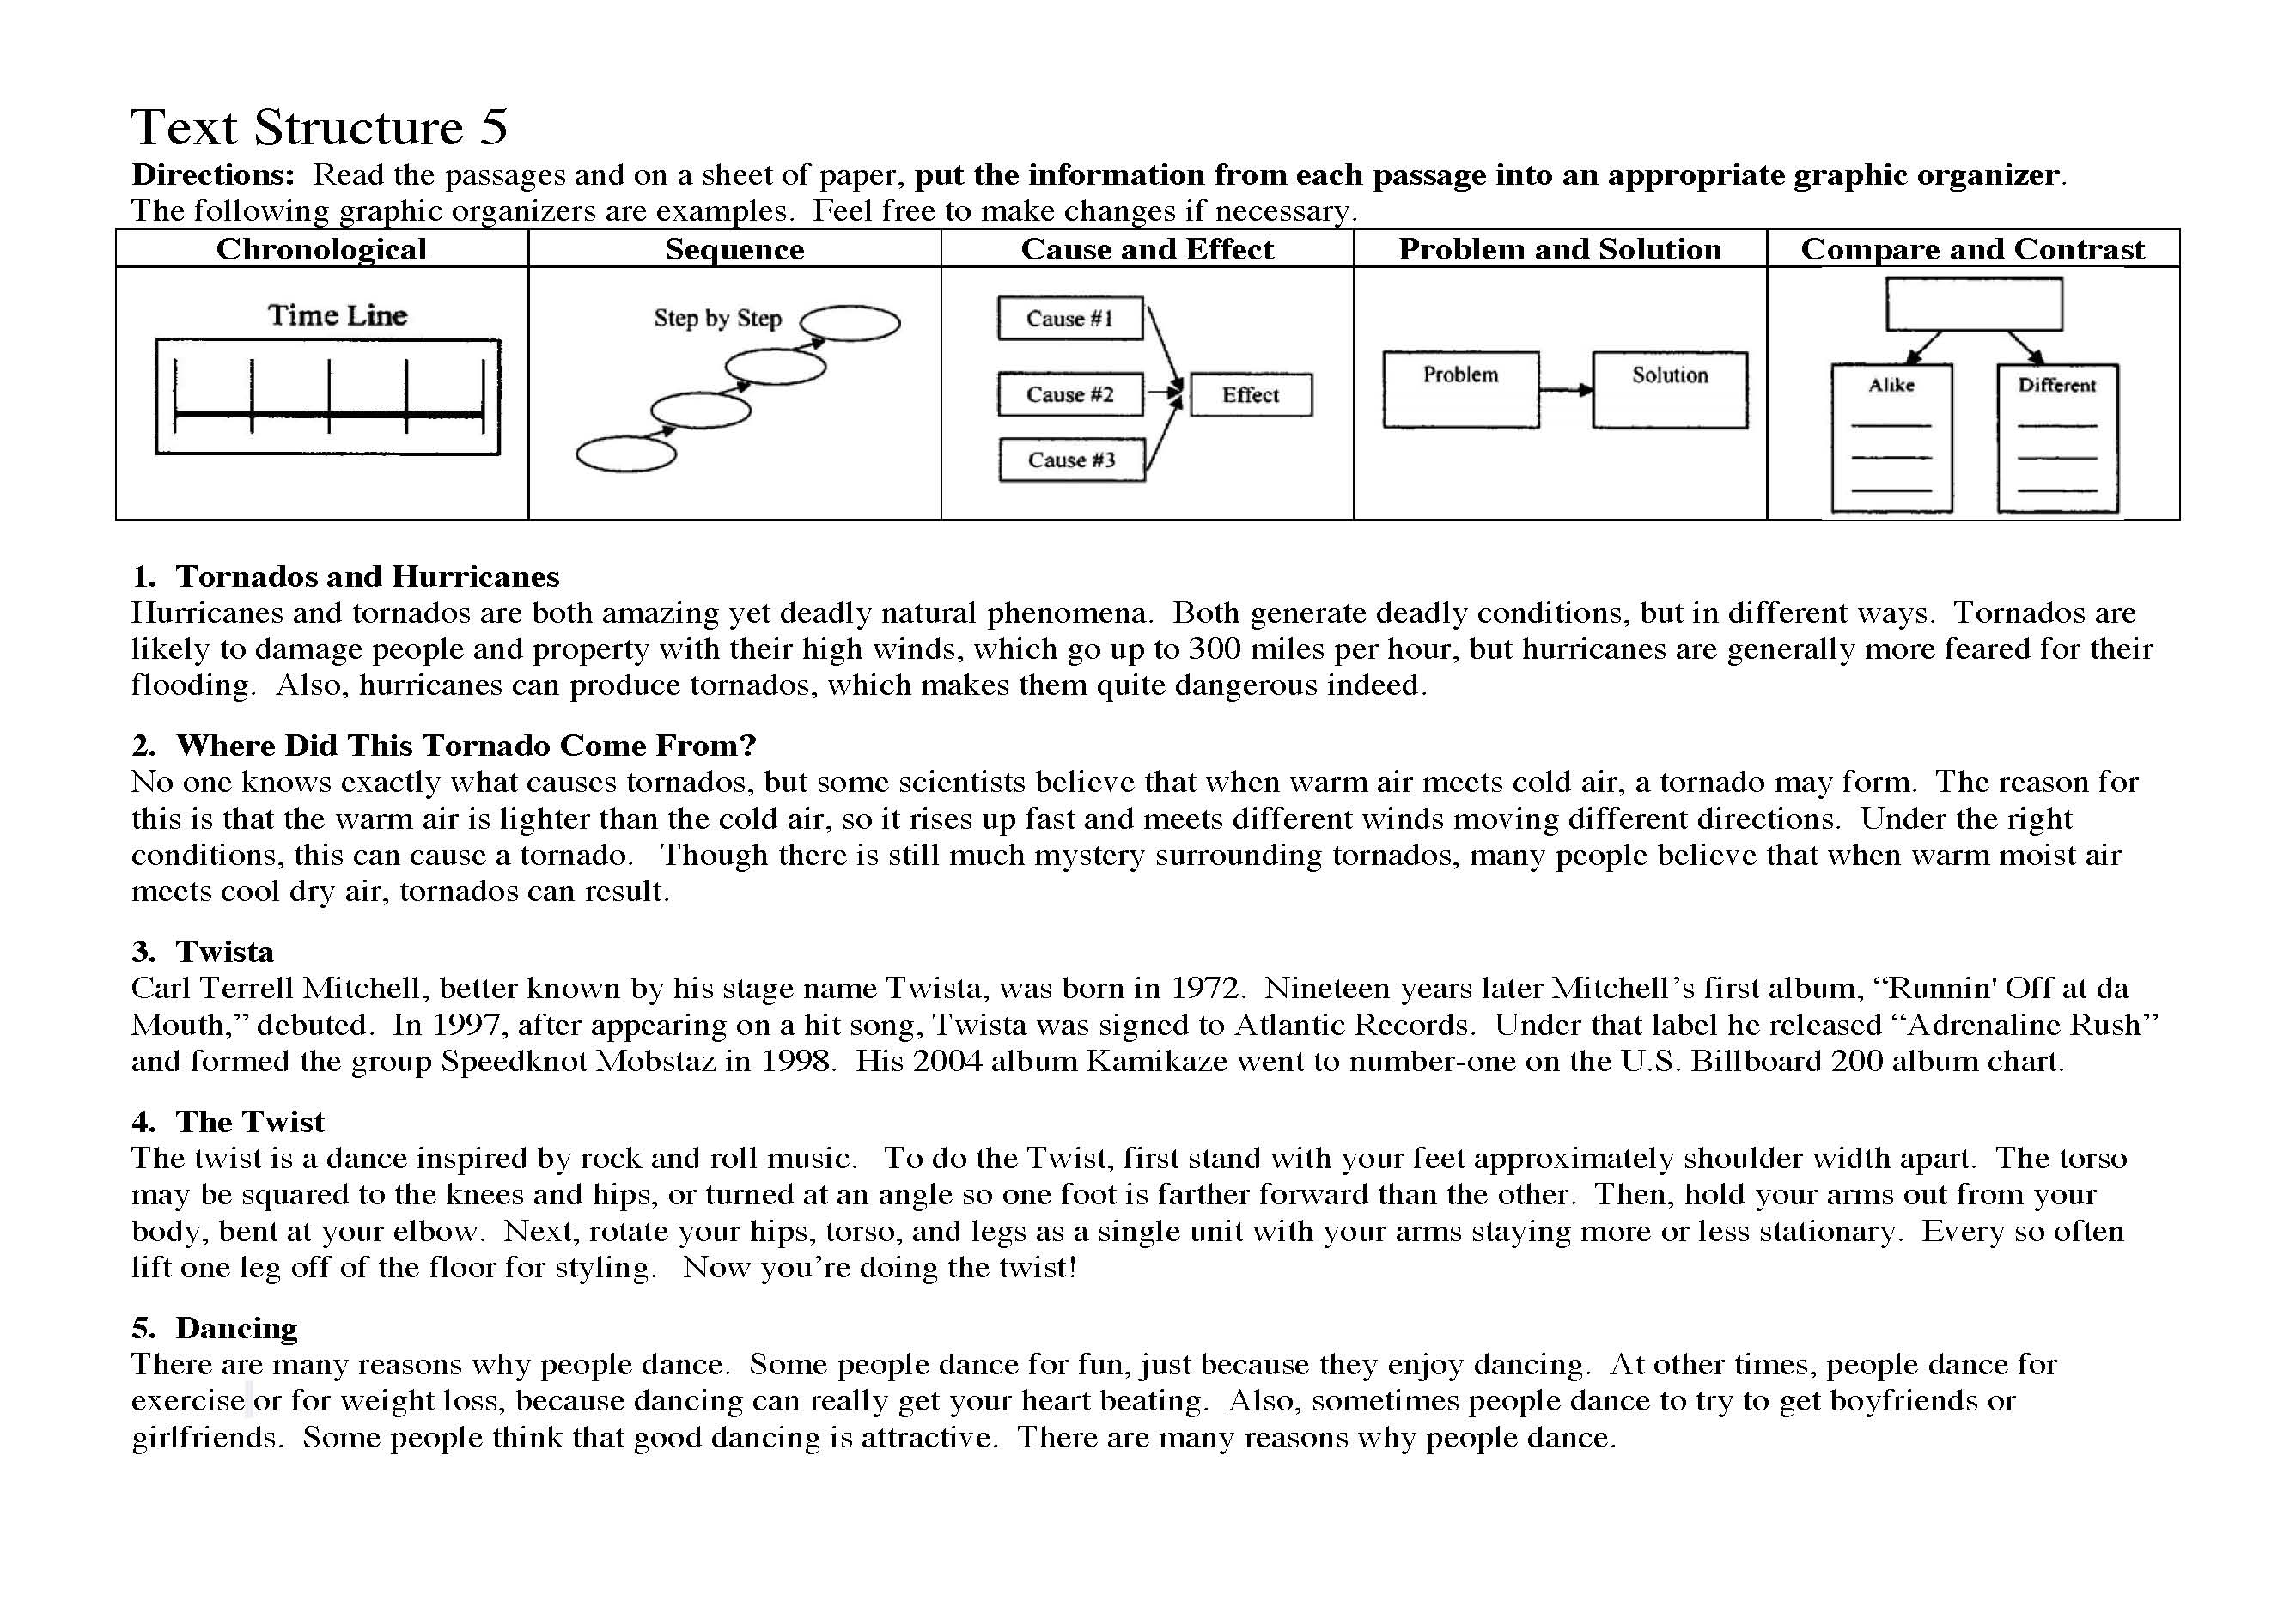 This is a preview image of Text Structure Worksheet 5. Click on it to enlarge it or view the source file.